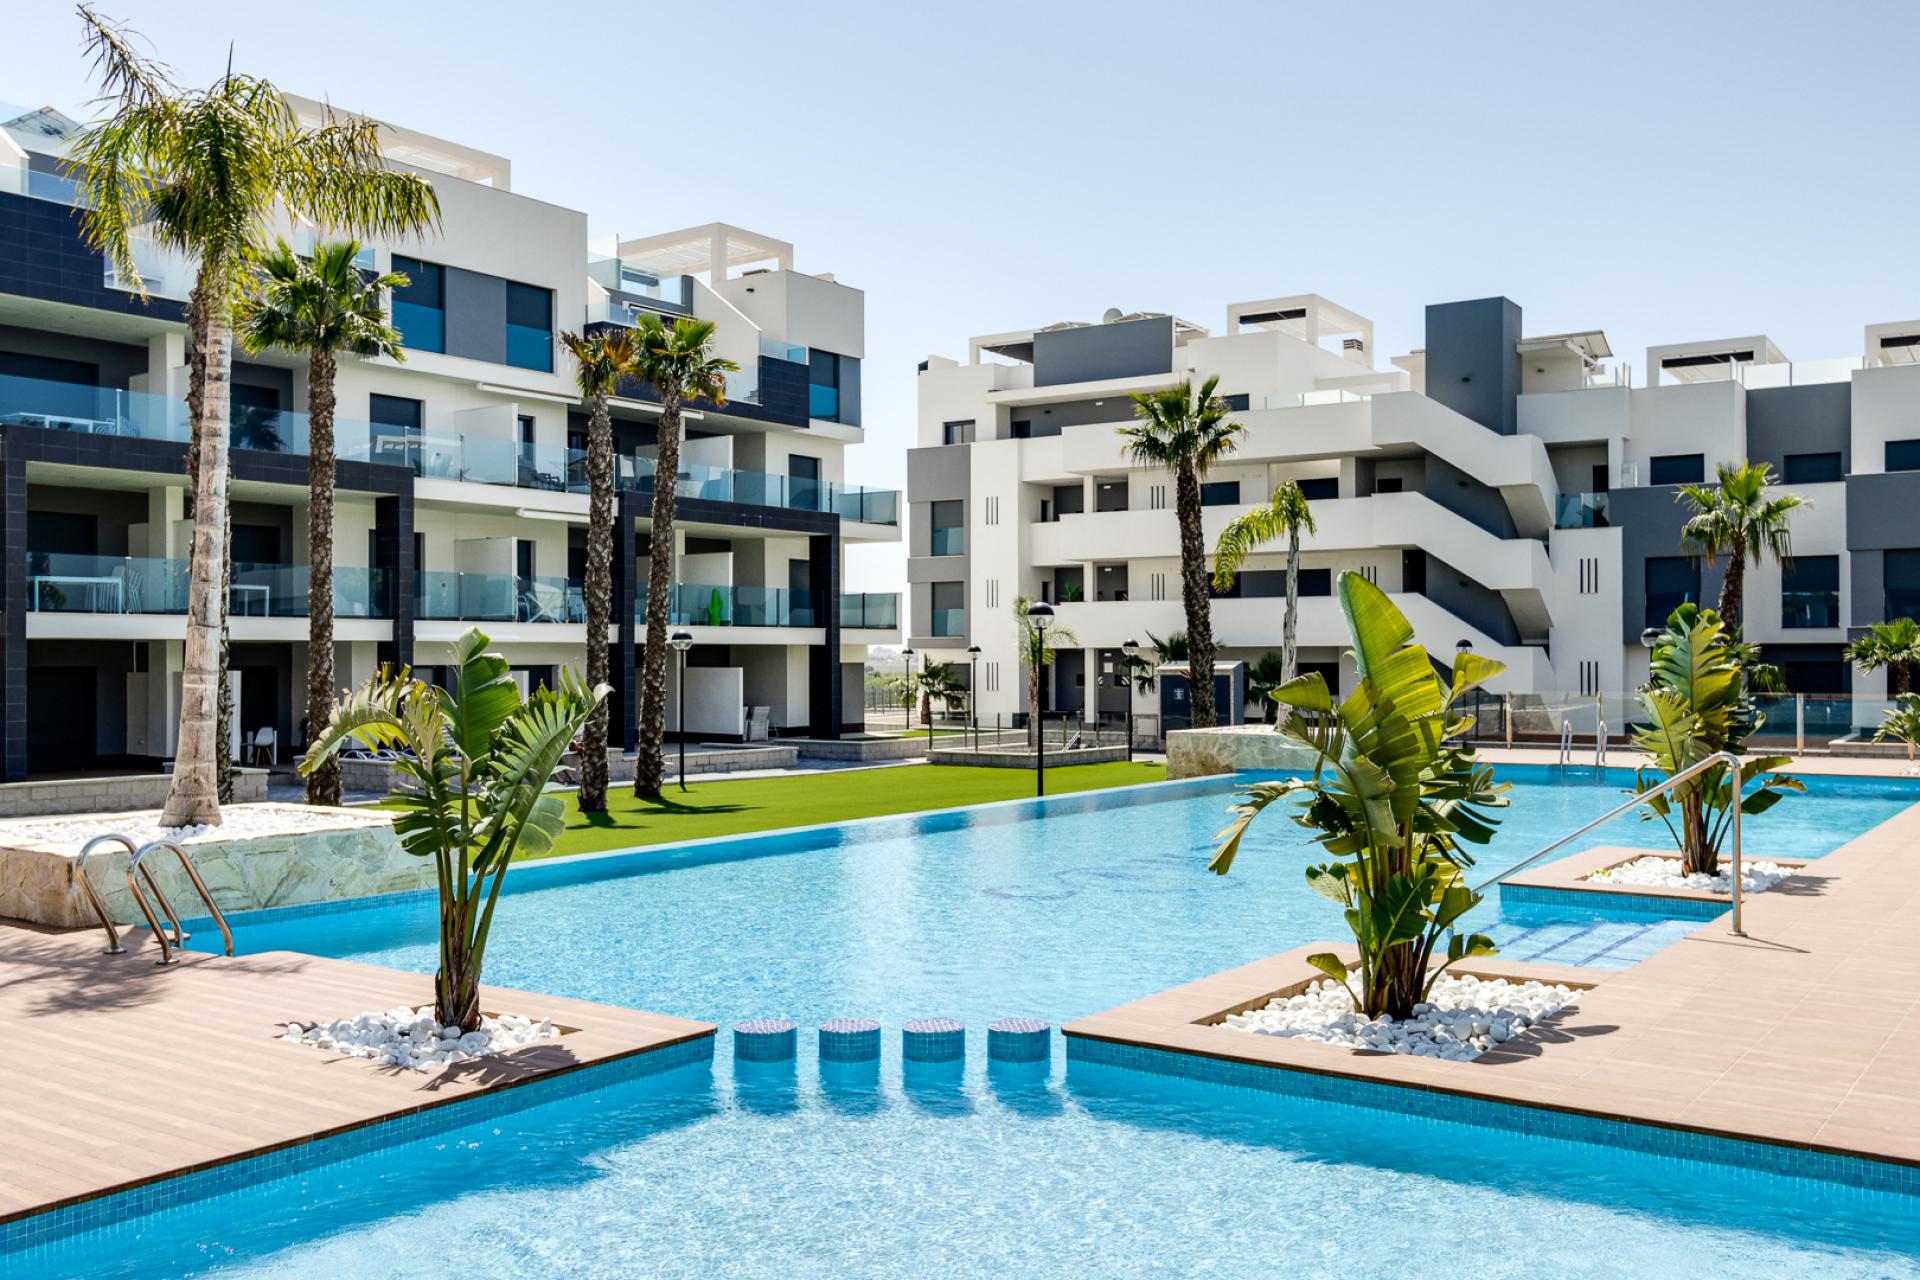 For sale apartments Oasis Beach XIV: new phase in Medvilla Spanje